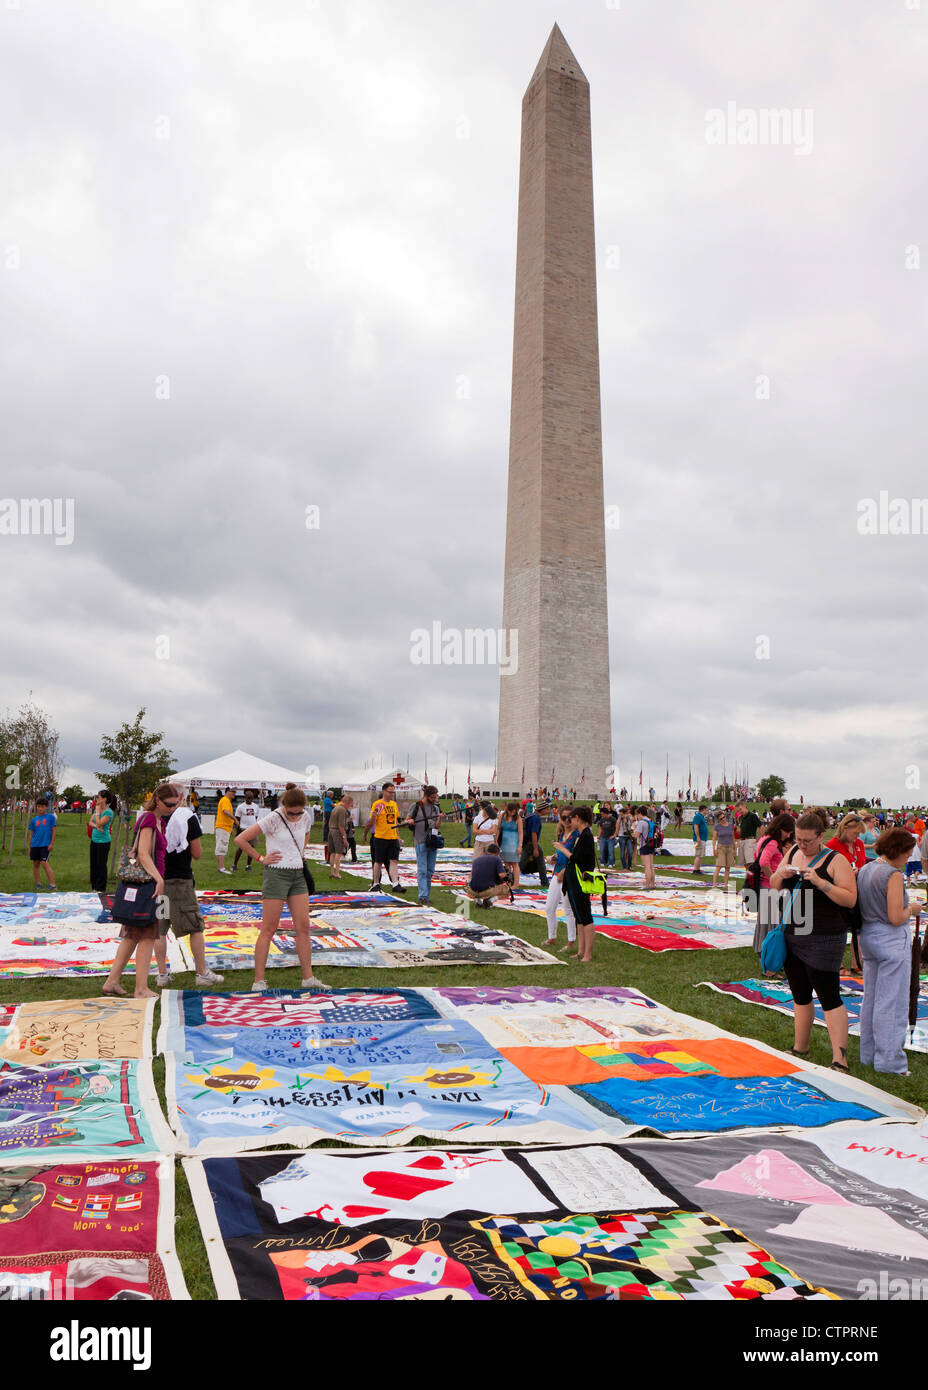 AIDS Memorial Quilt panels are put on display on the Mall to mark its 25th anniversary - July 22, 2012, Washington, DC USA Stock Photo